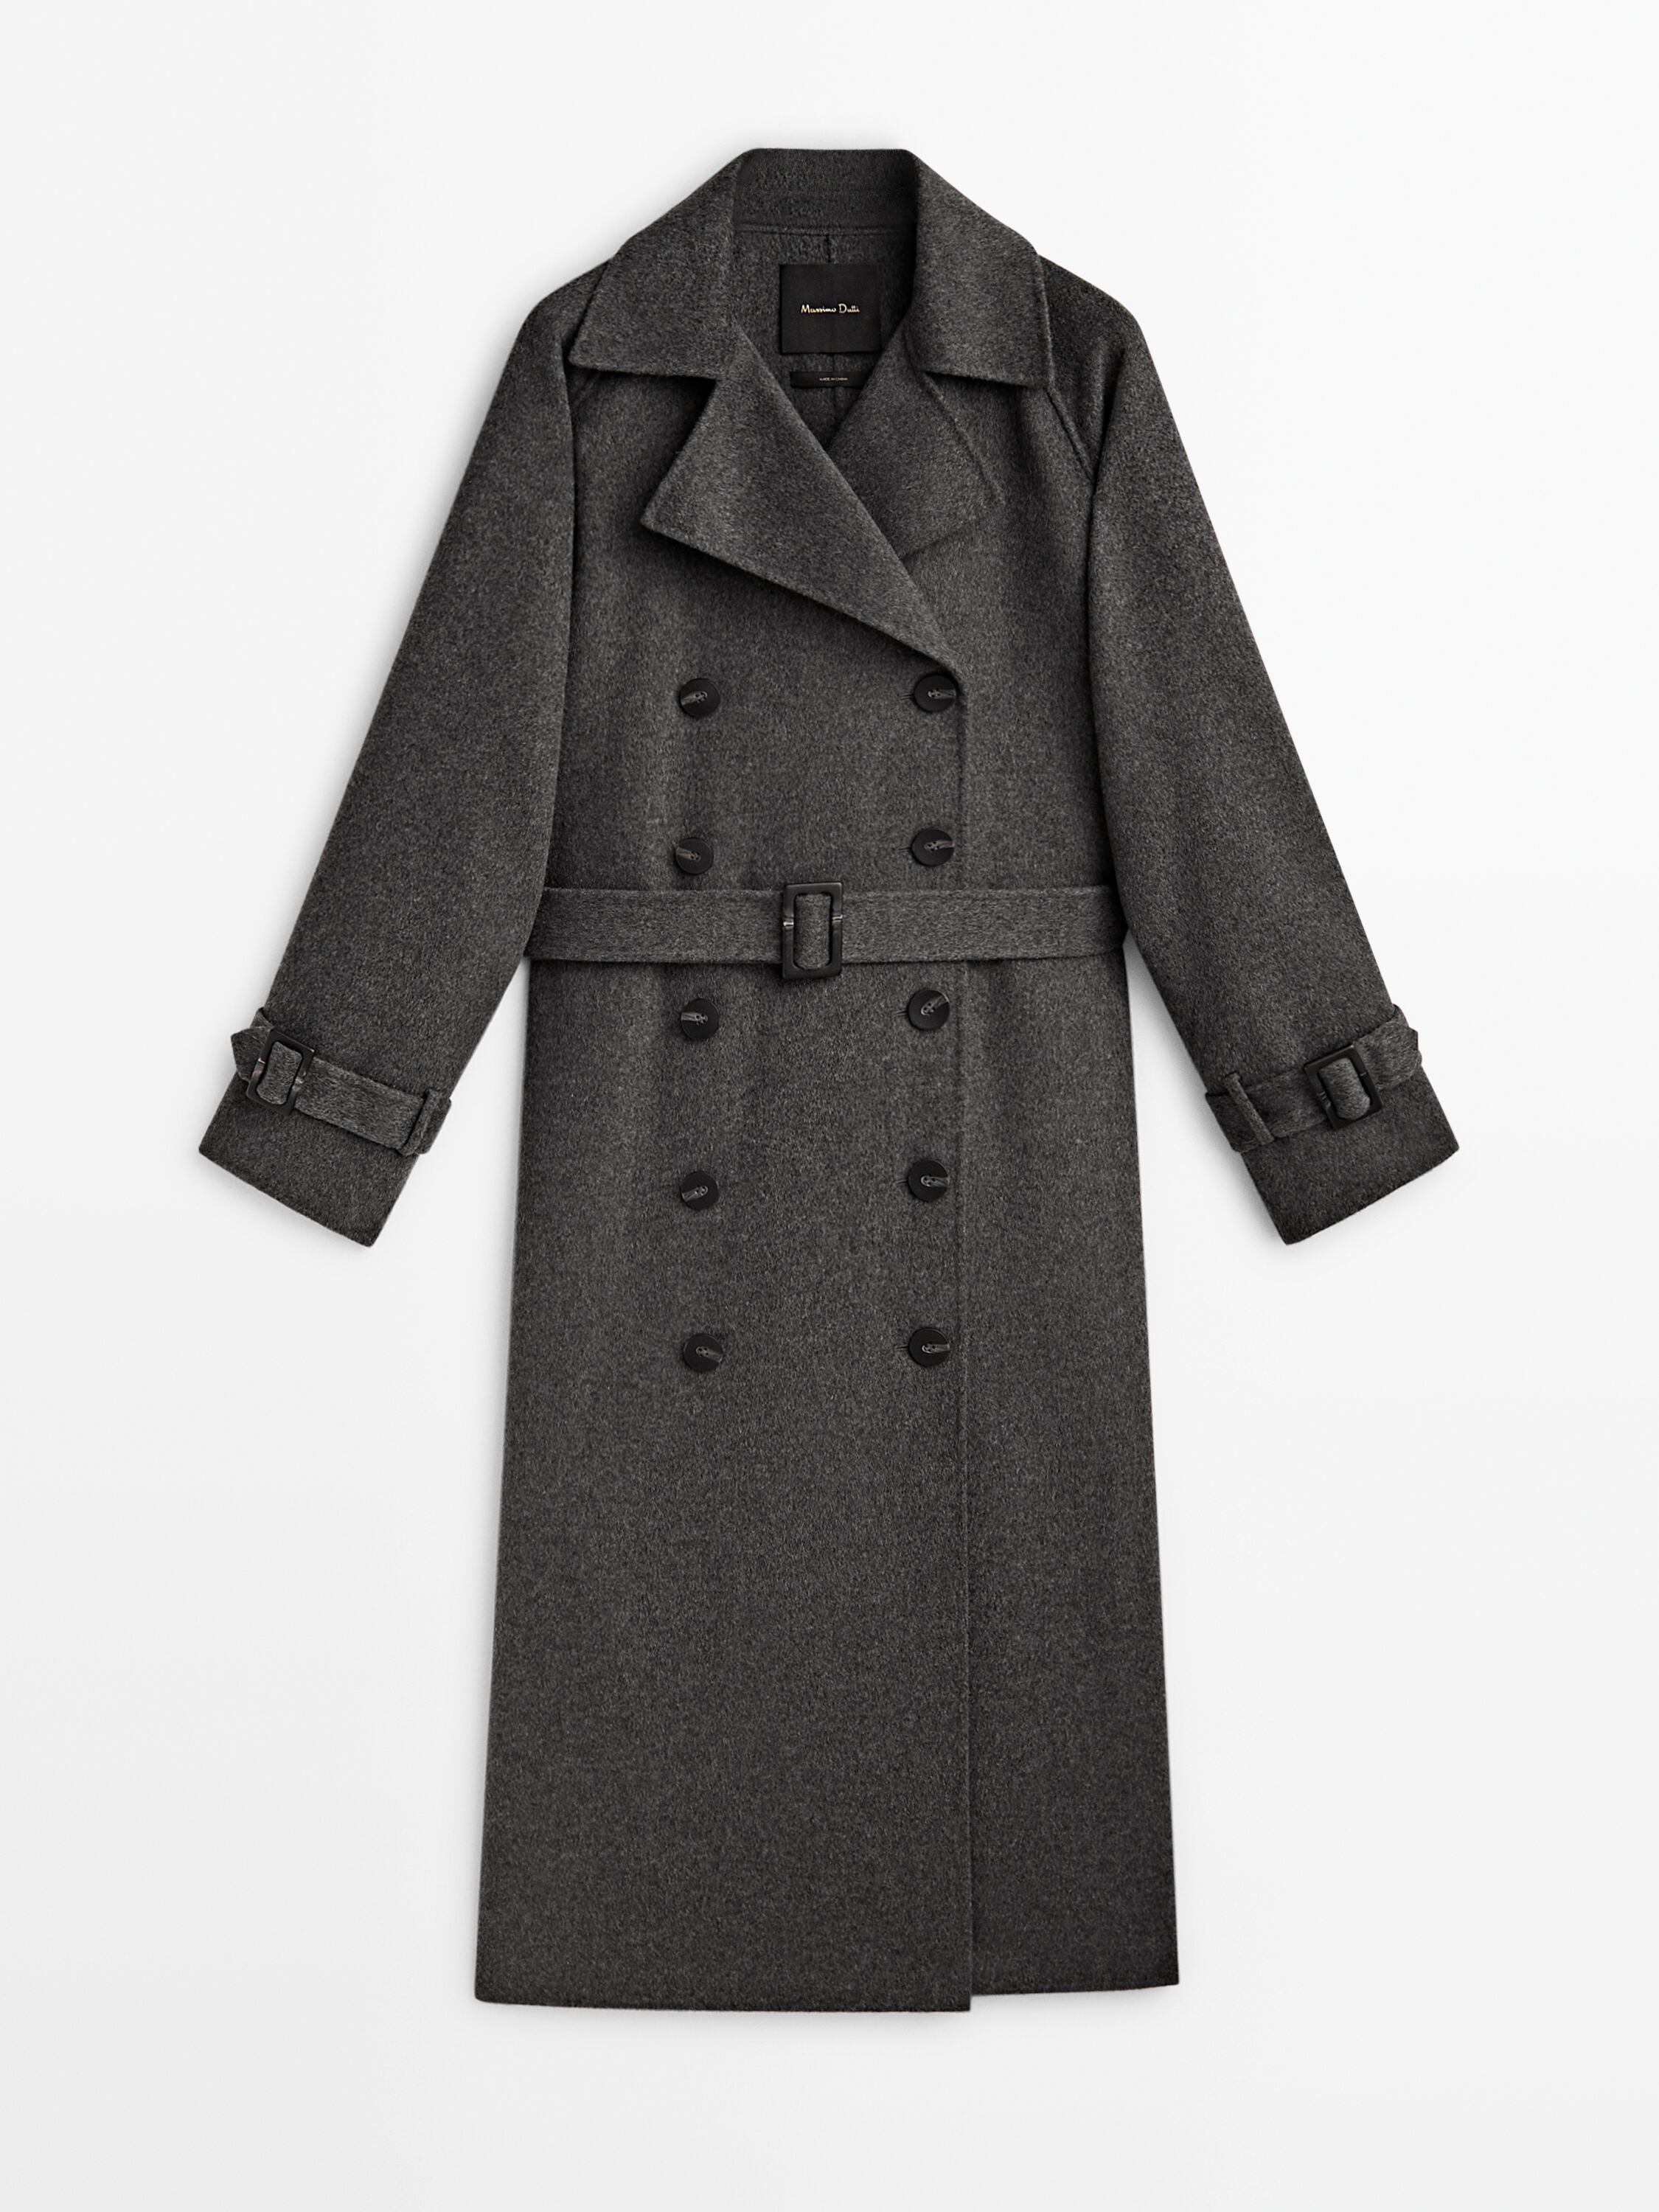 Wool blend double-breasted trench coat